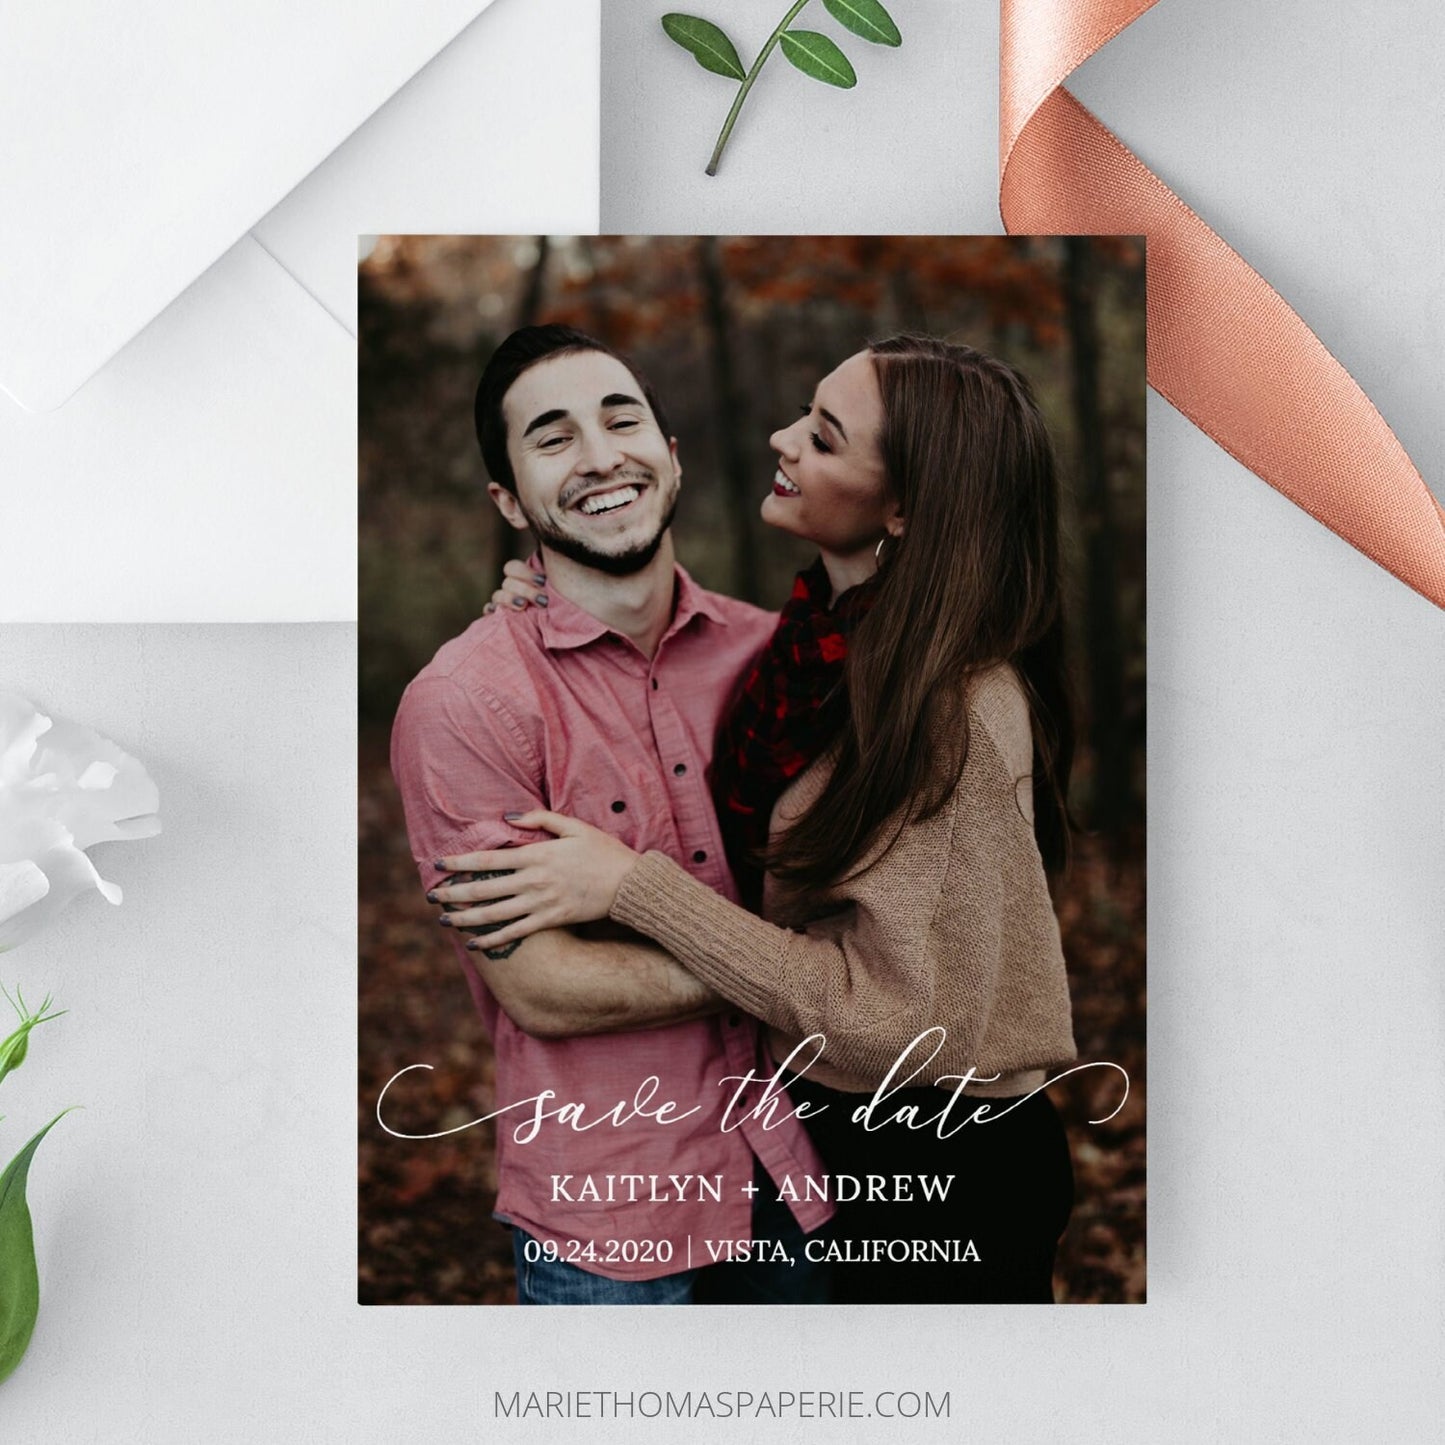 Editable Save the Date with Photo Save the Date Cards Wedding Announcement Text Digital Template